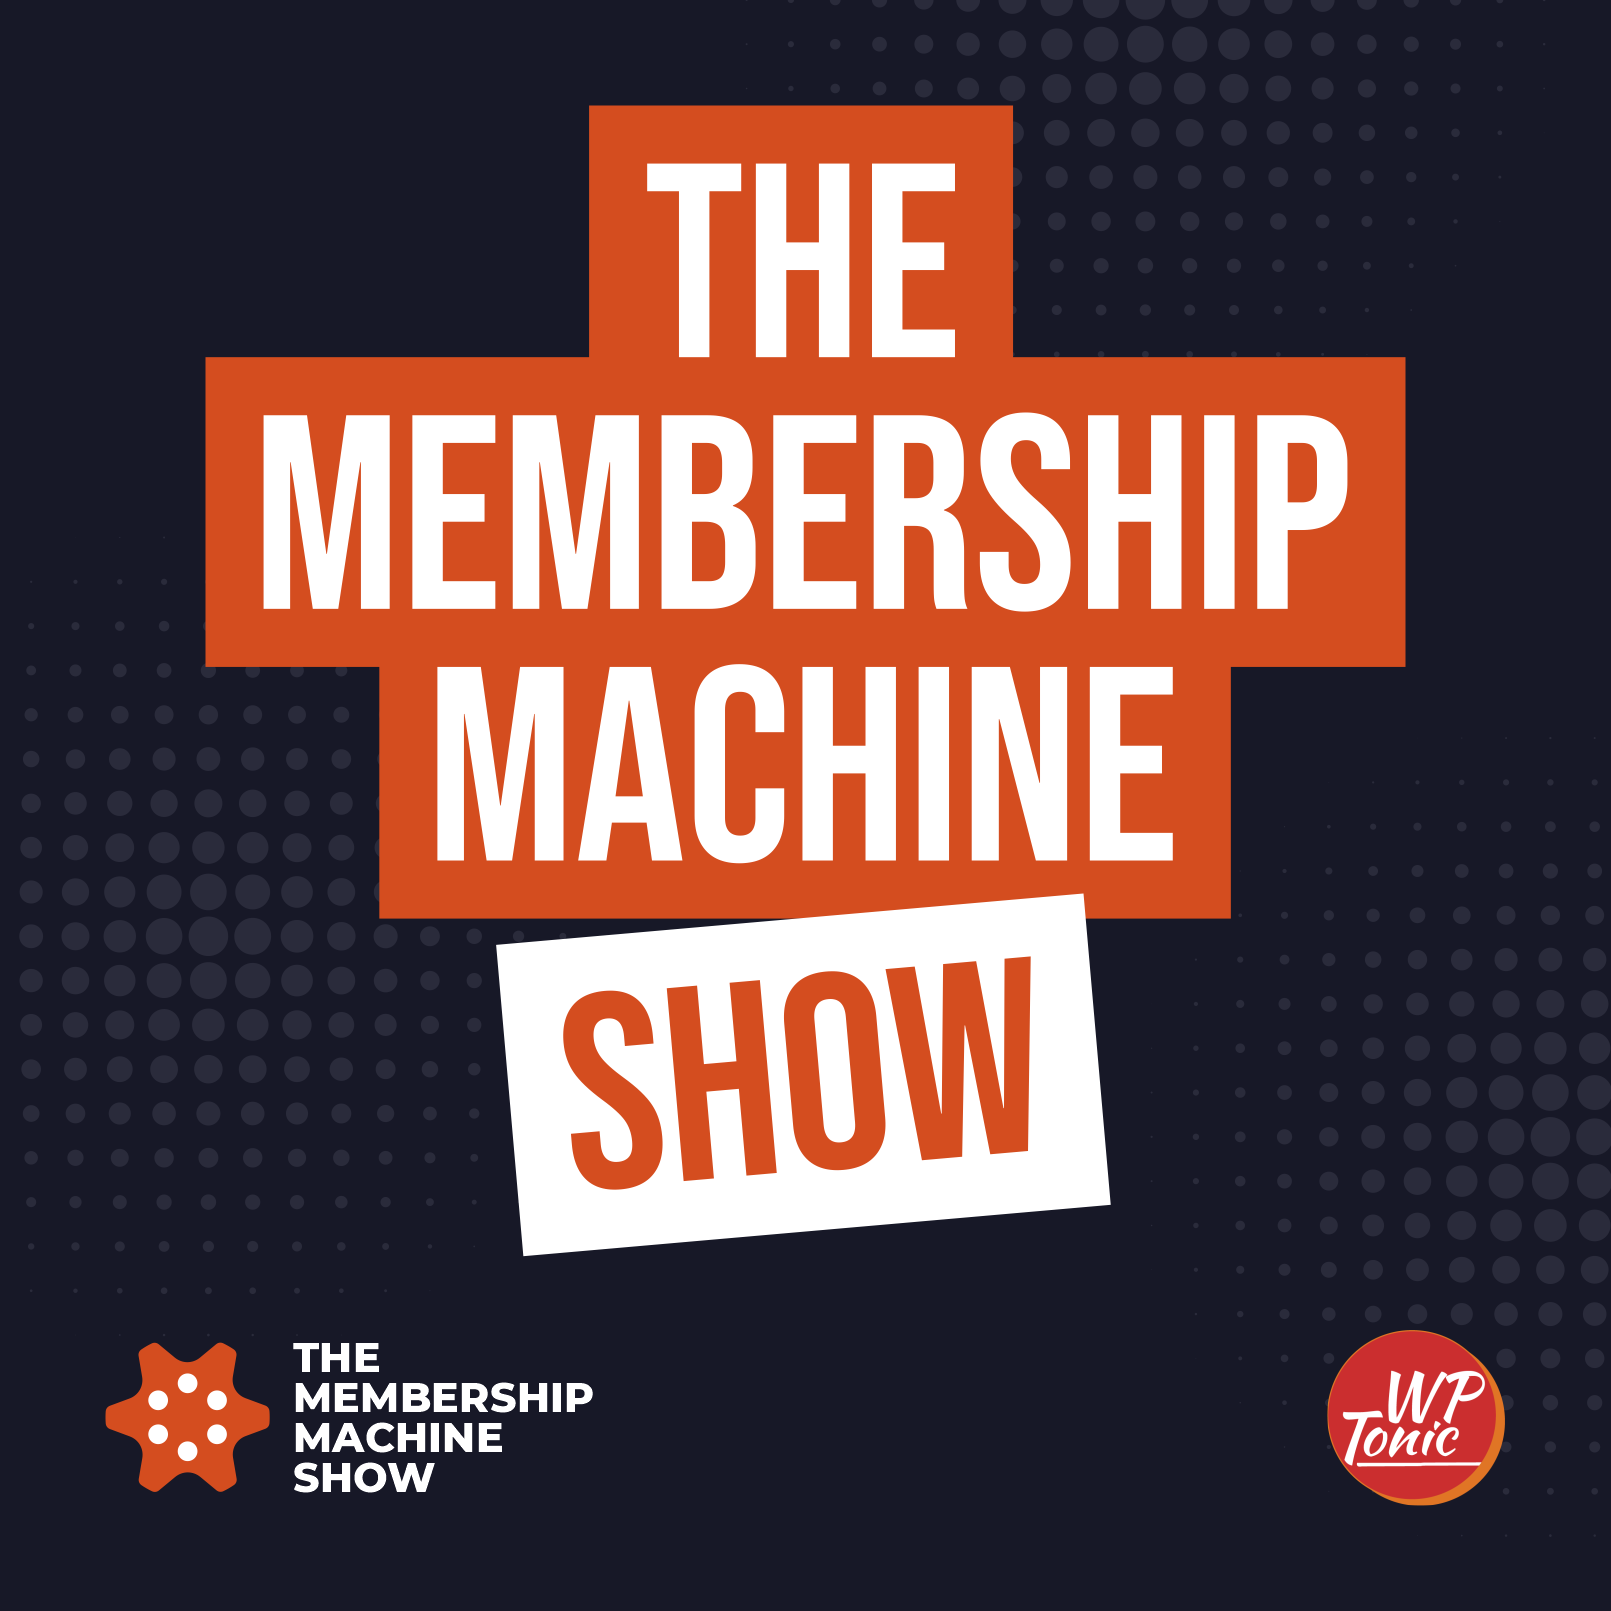 34 -The Membership Machine Show: We Look At The Best WordPress Solutions For Non-Profits & Associations in 2023